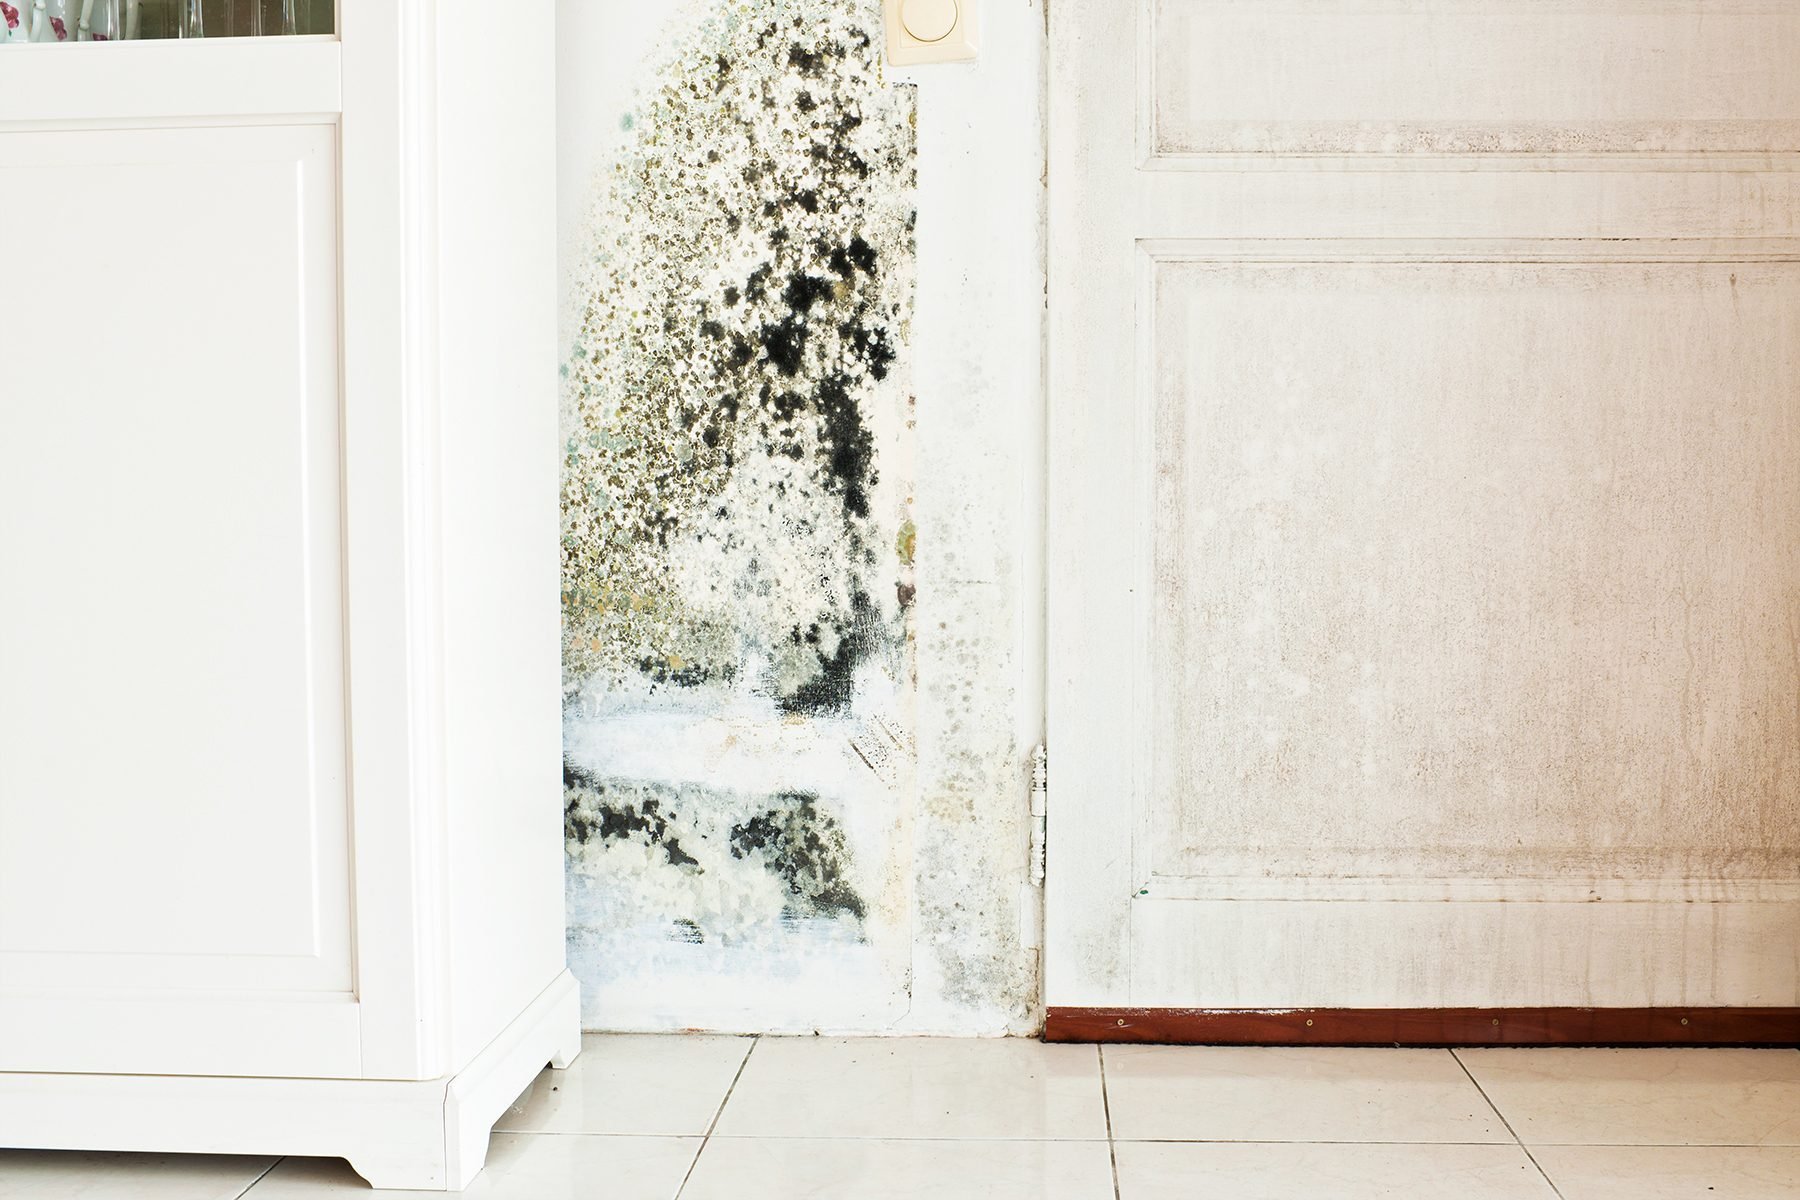 How to Get Rid of Mold on Bathroom Walls